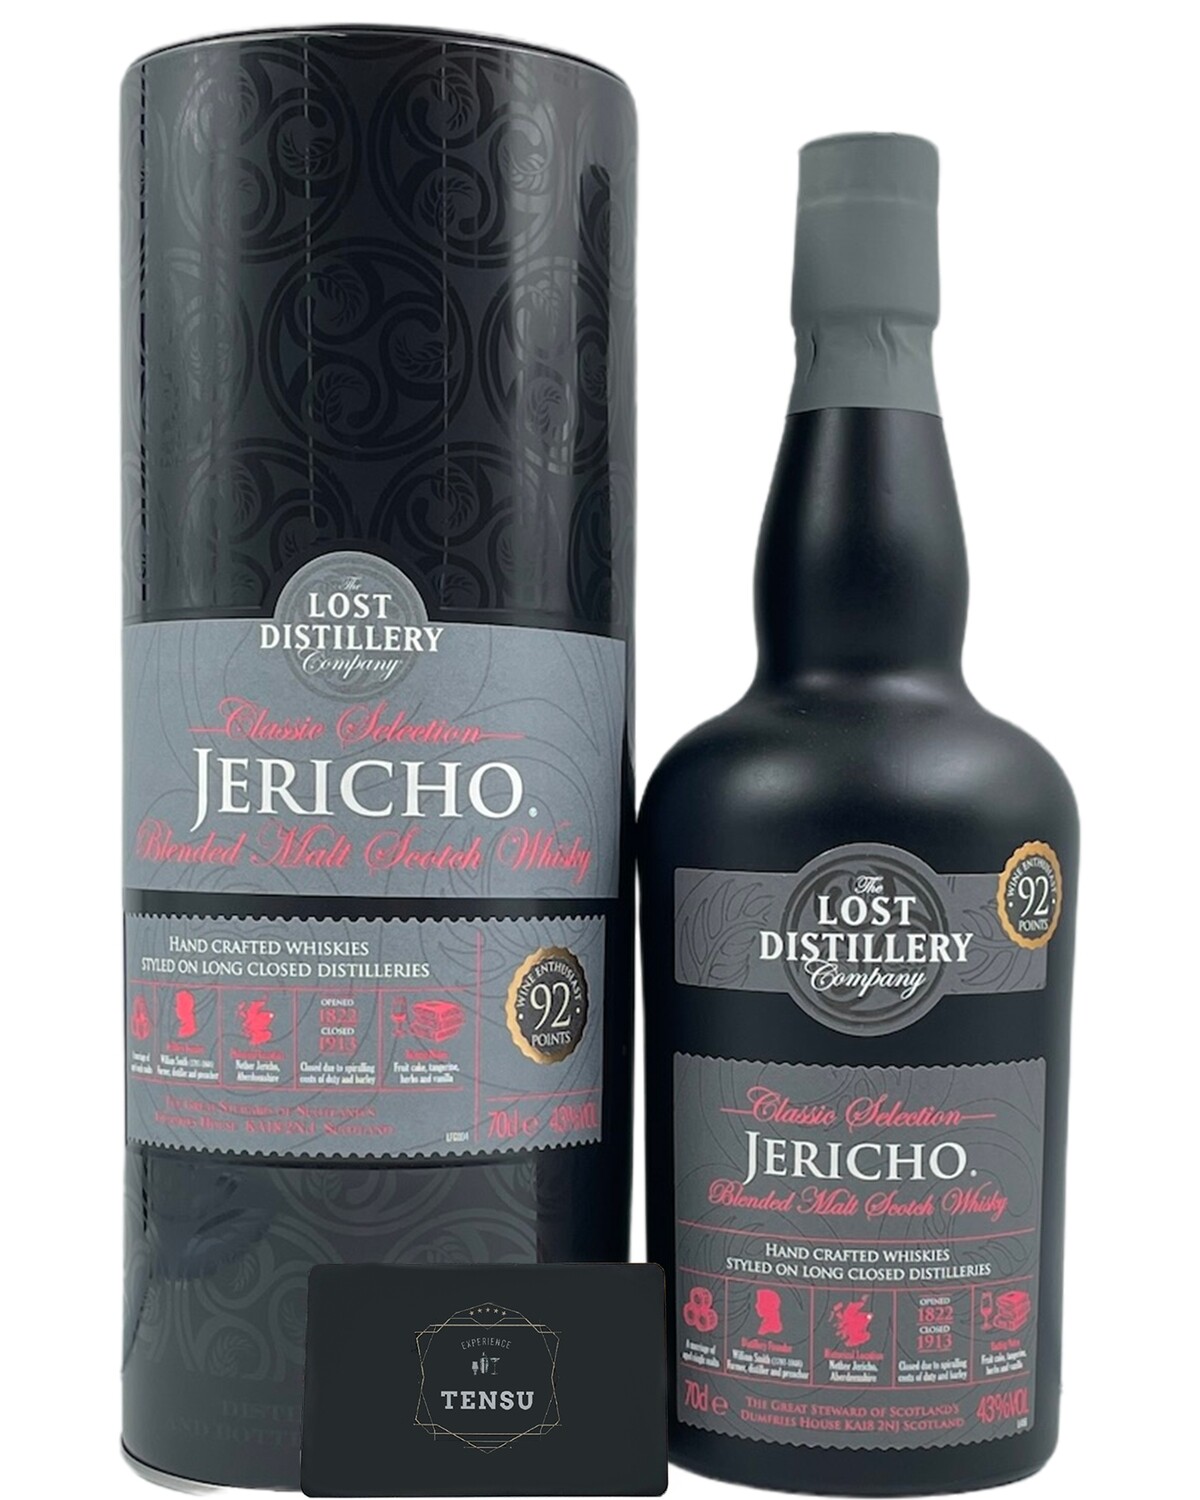 Jericho - Classic Selection 43.0 "The Lost Distillery Company"